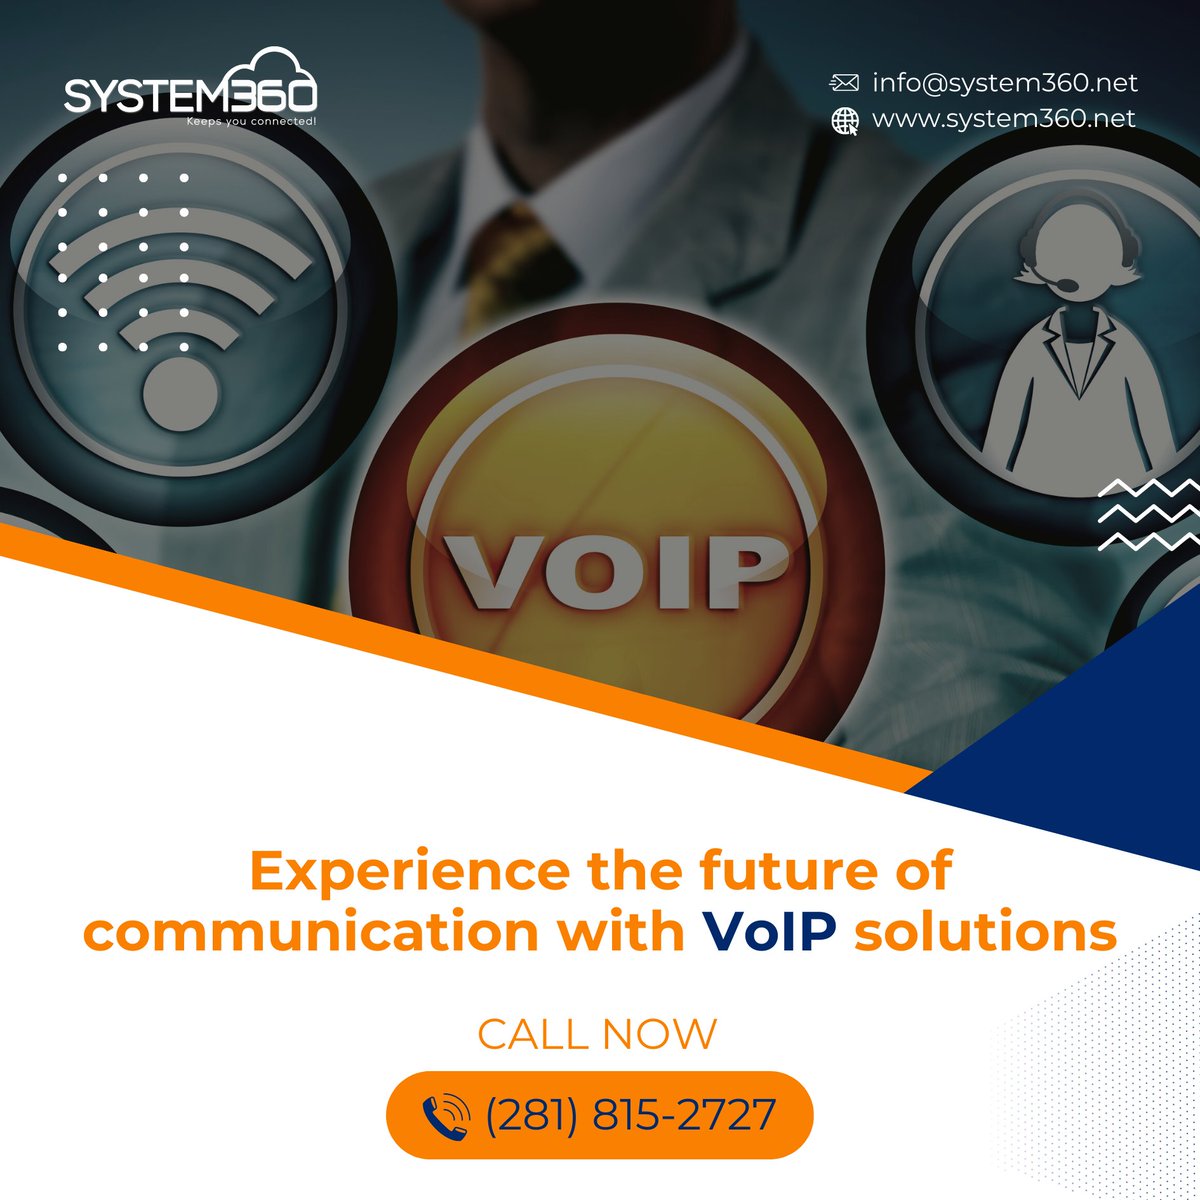 Explore VoIP Solutions Today to Transform Your Communication!

system360.net

#VoIPSolutions #System360 #RevolutionizeCommunication #CrystalClearCalls #Scalability #RobustSecurity #FutureOfCommunication #SeamlessConnectivity #StayConnected #DigitalTransformation